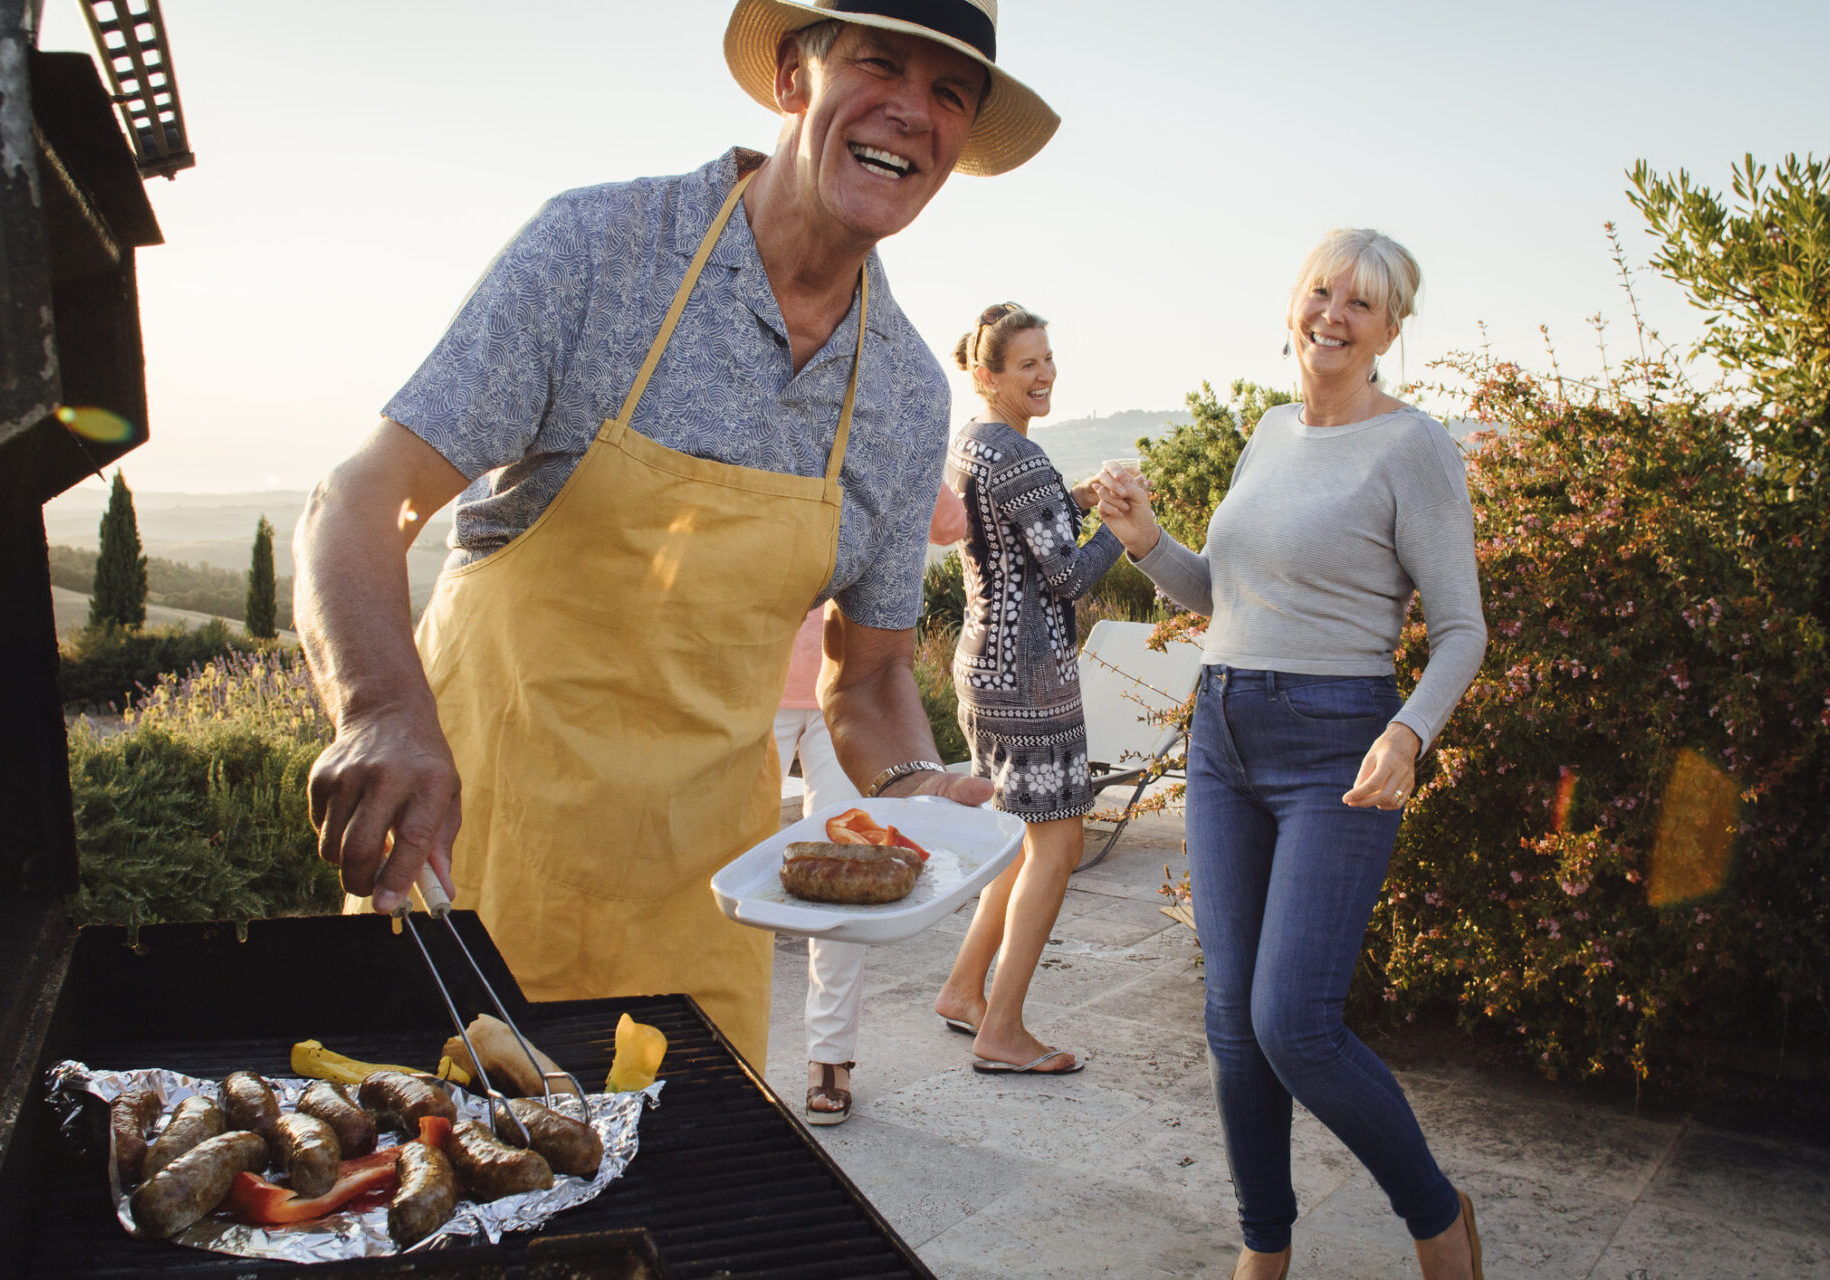 A man and two women grilling food on an outdoor grill.